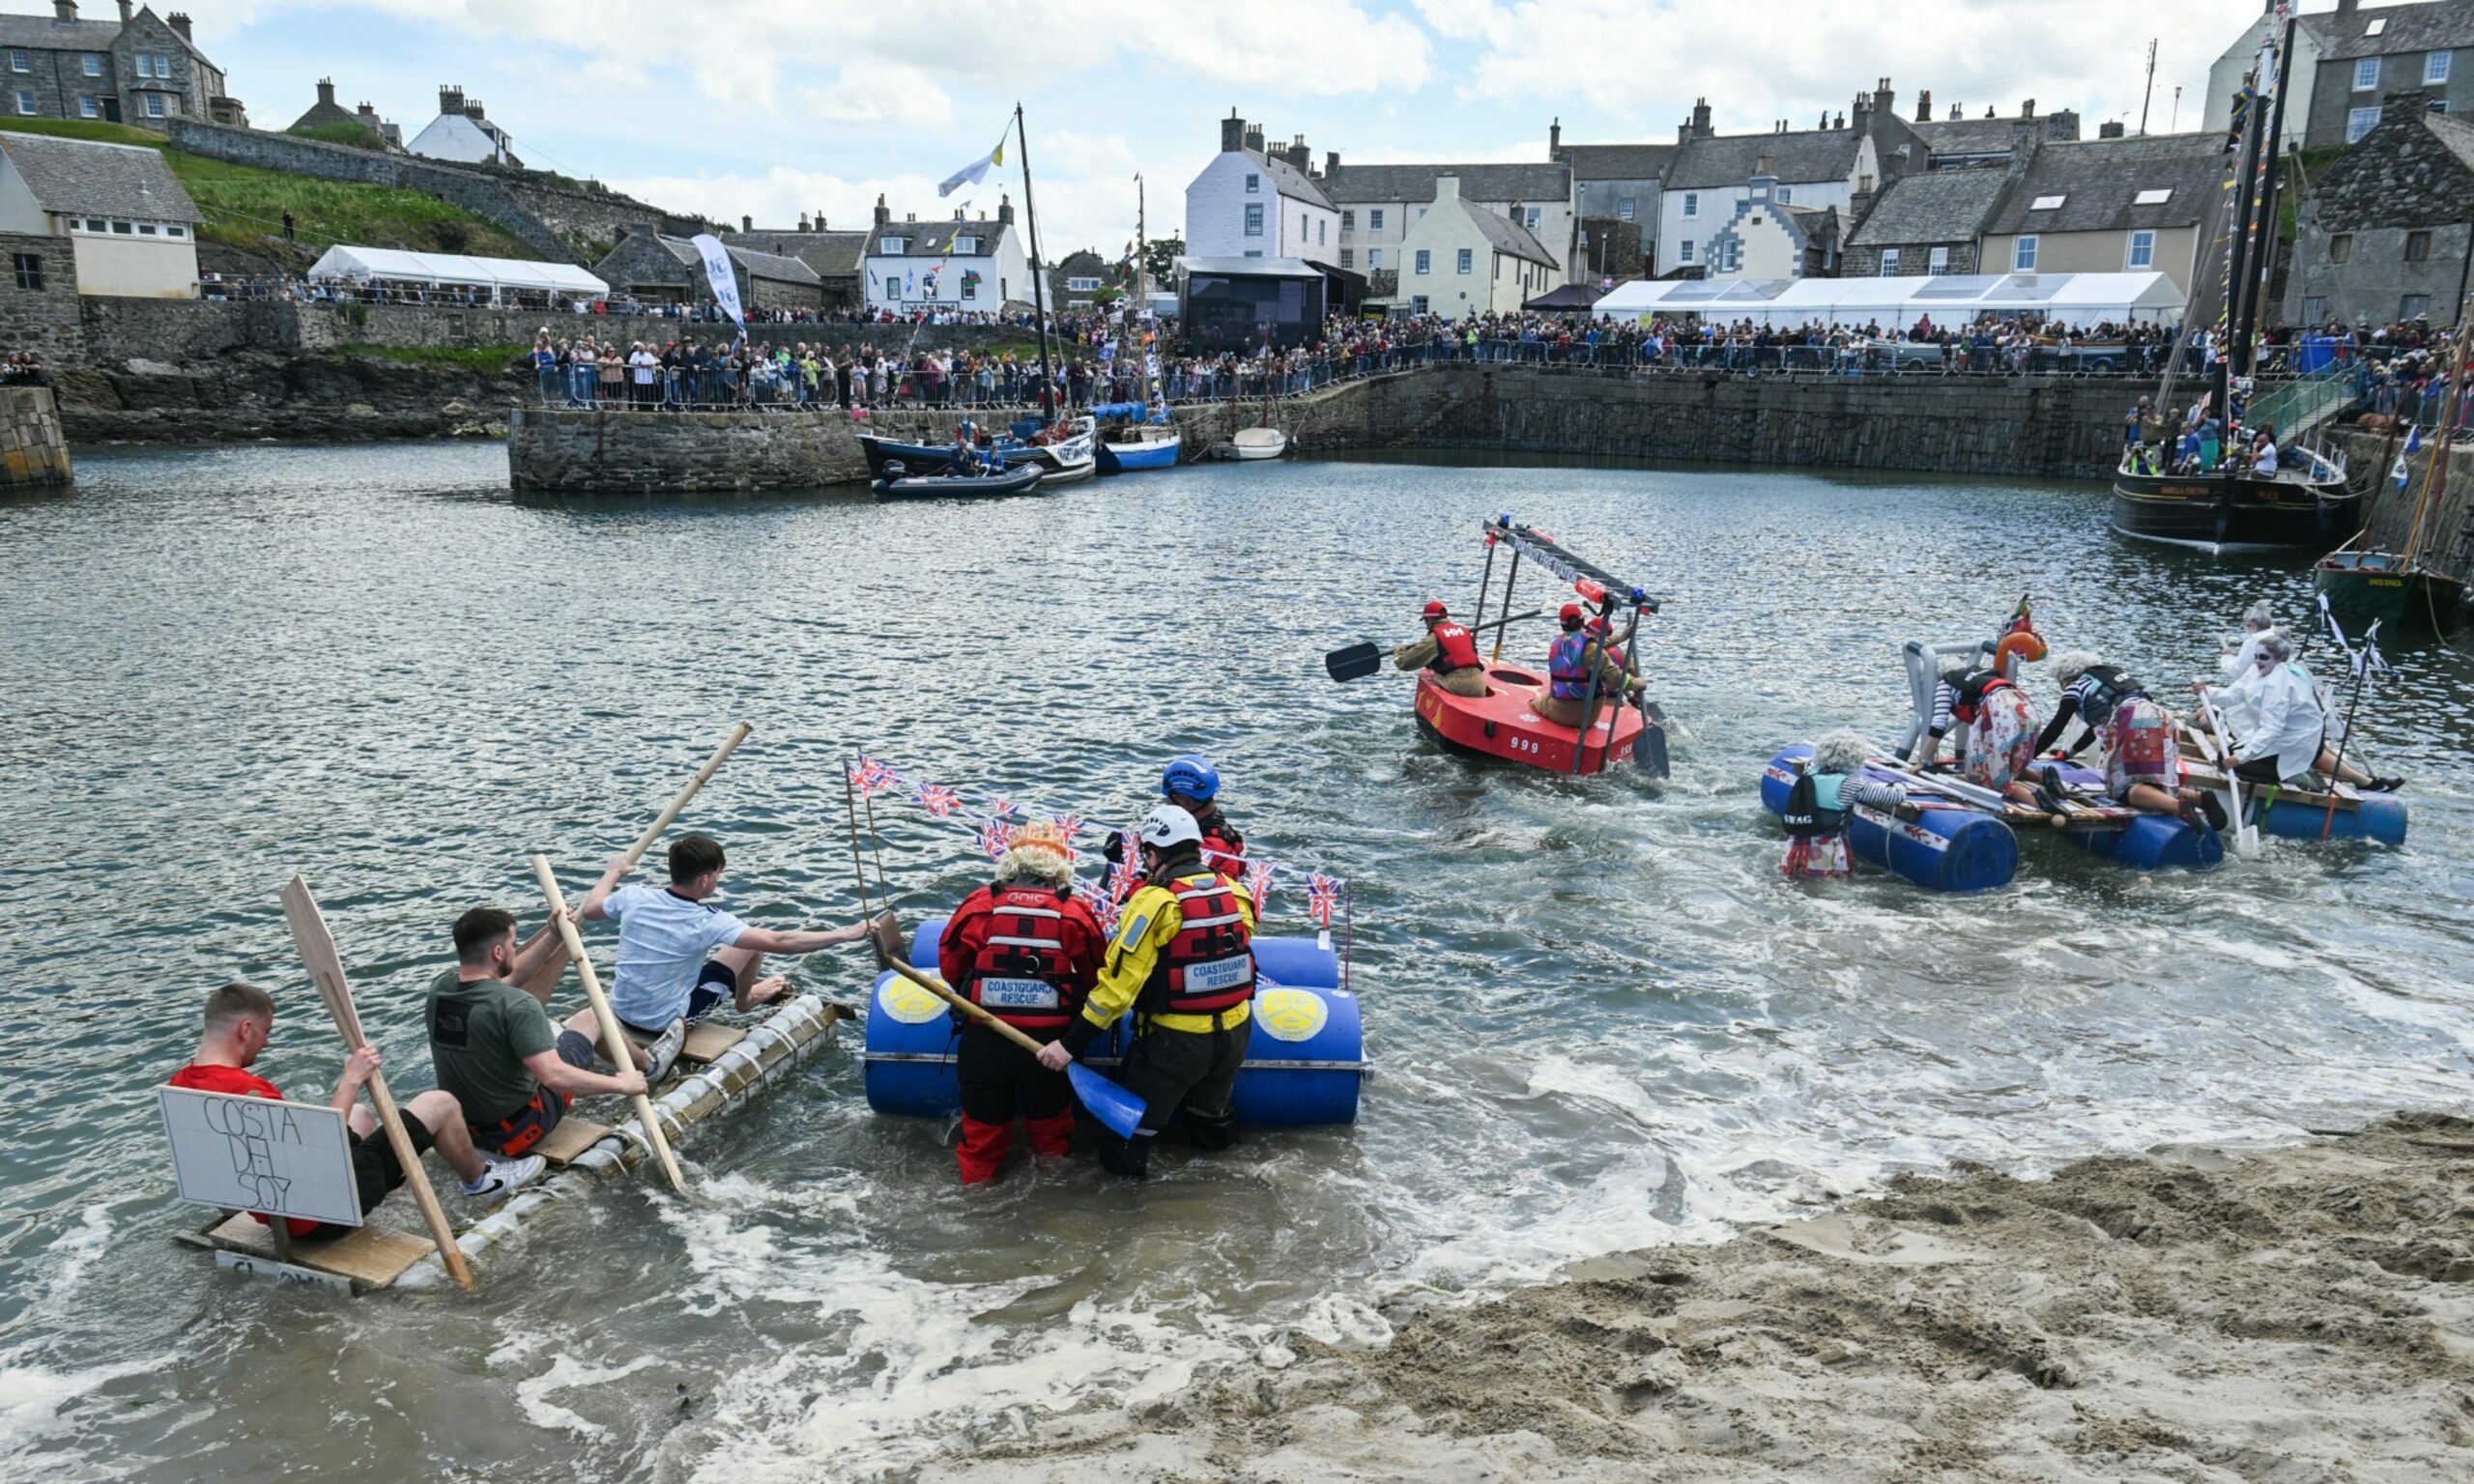 The Scottish Traditional Boat Festival at Portsoy has a triumphant return